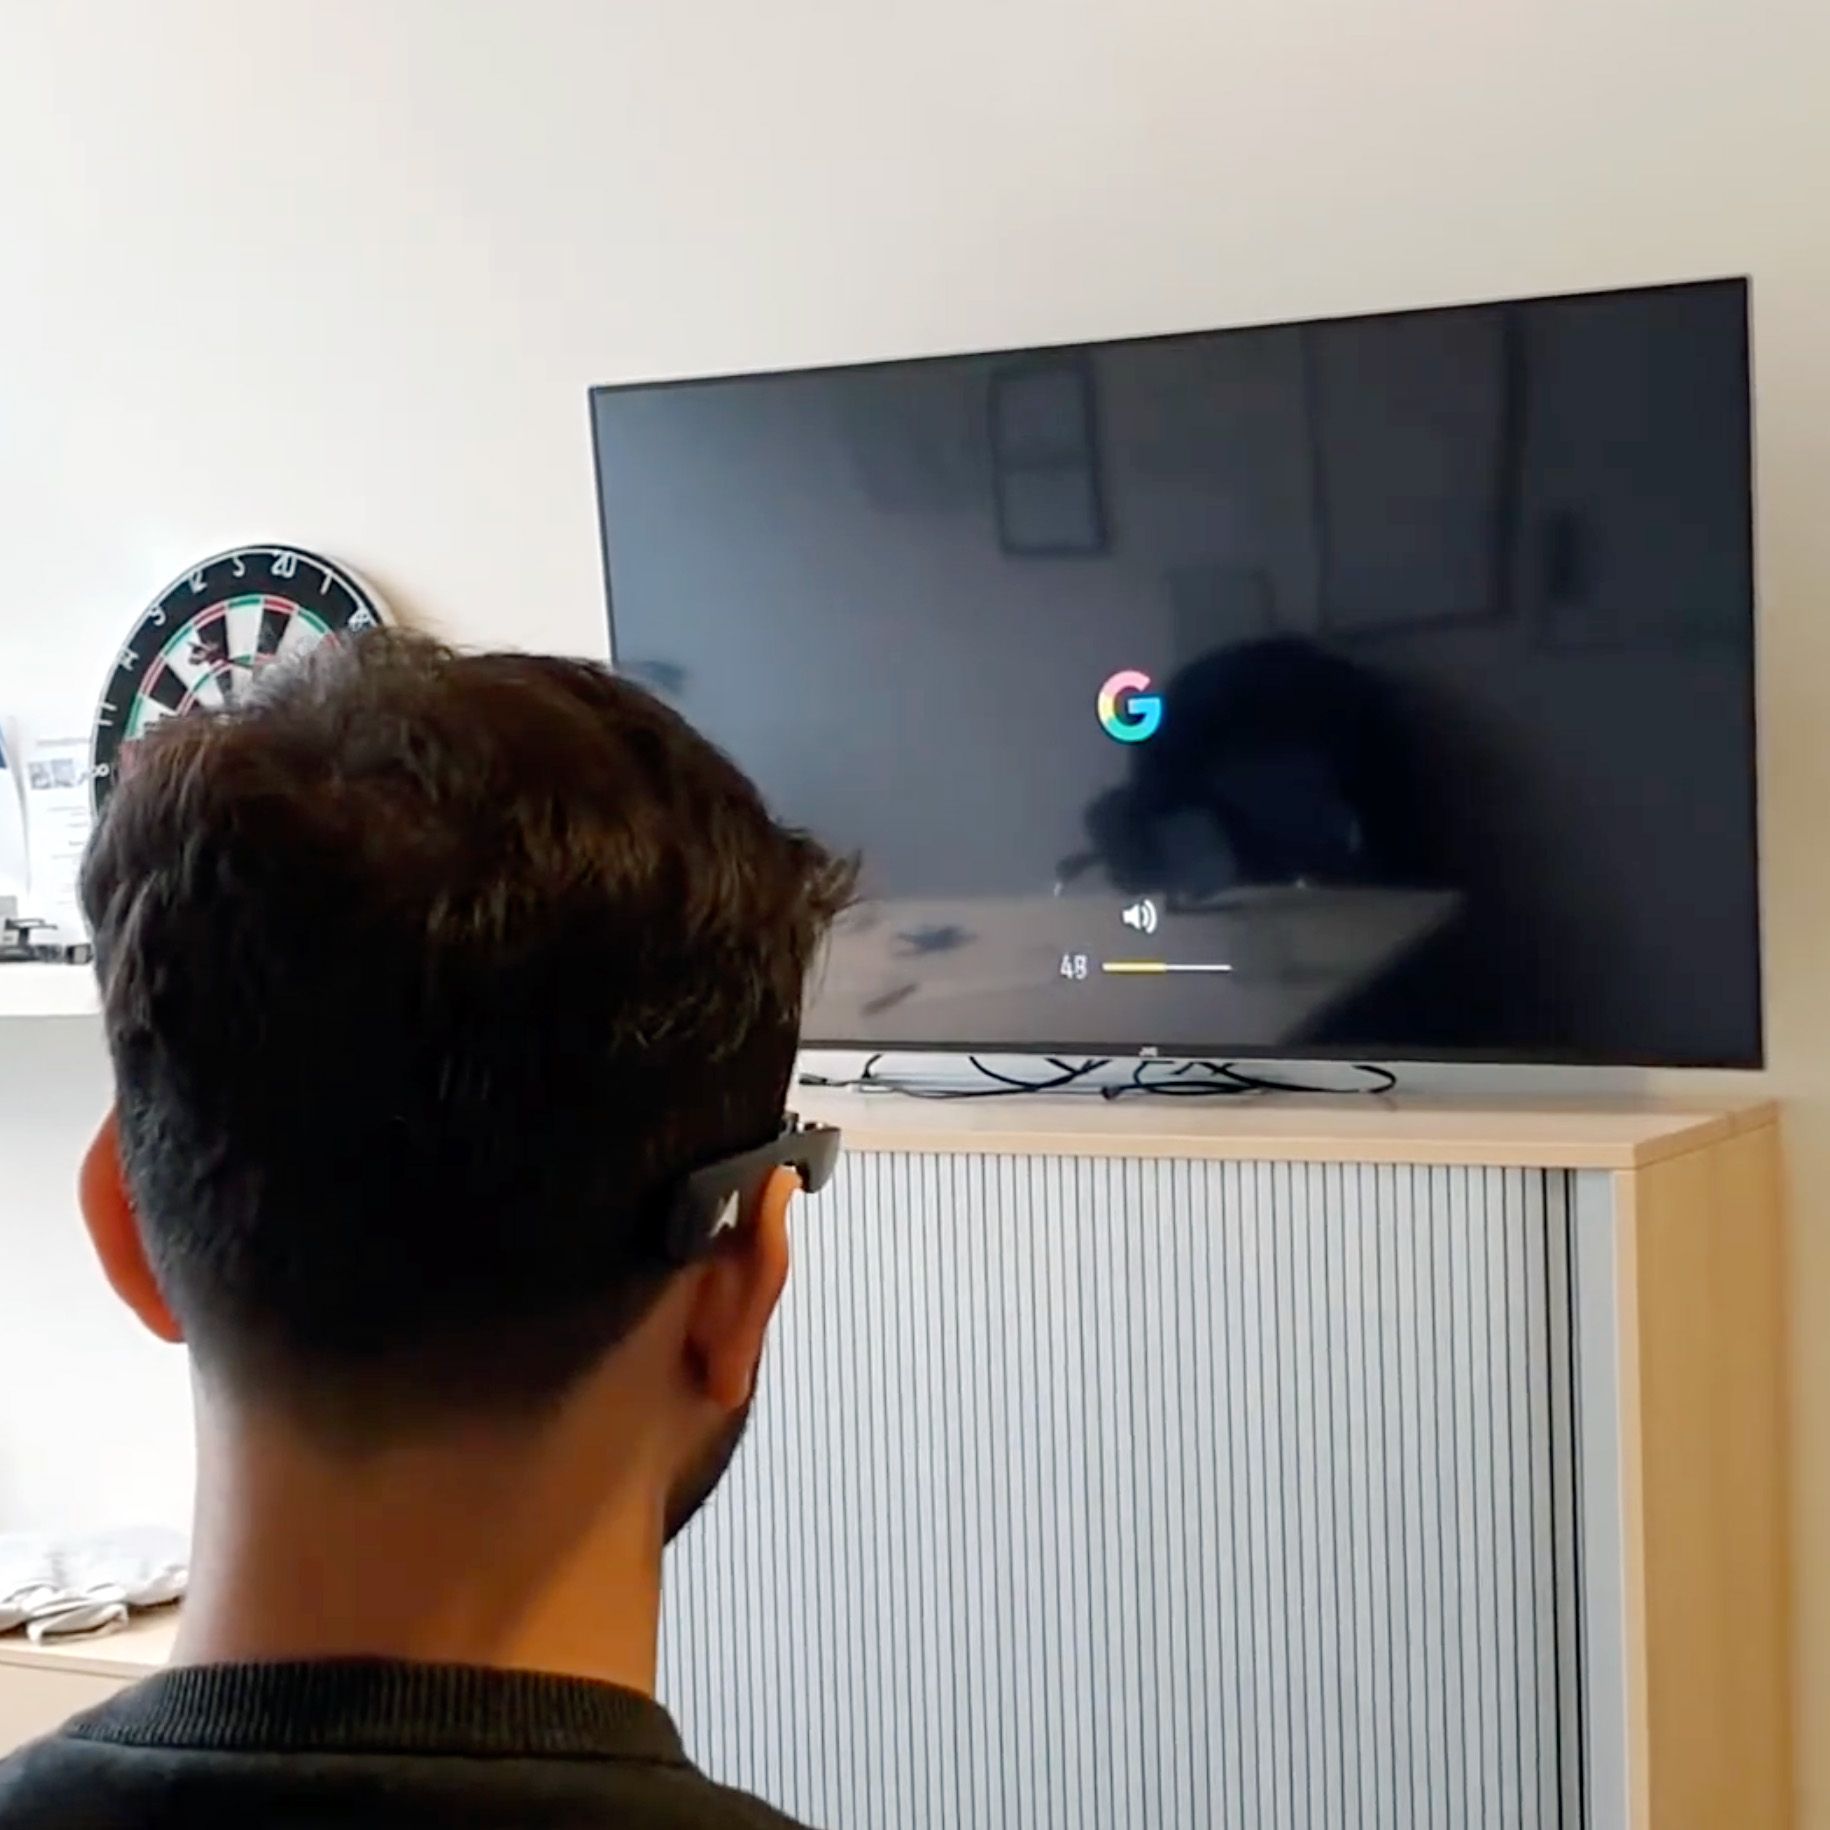 A munevo user turning up the volume of their TV using their smart glasses